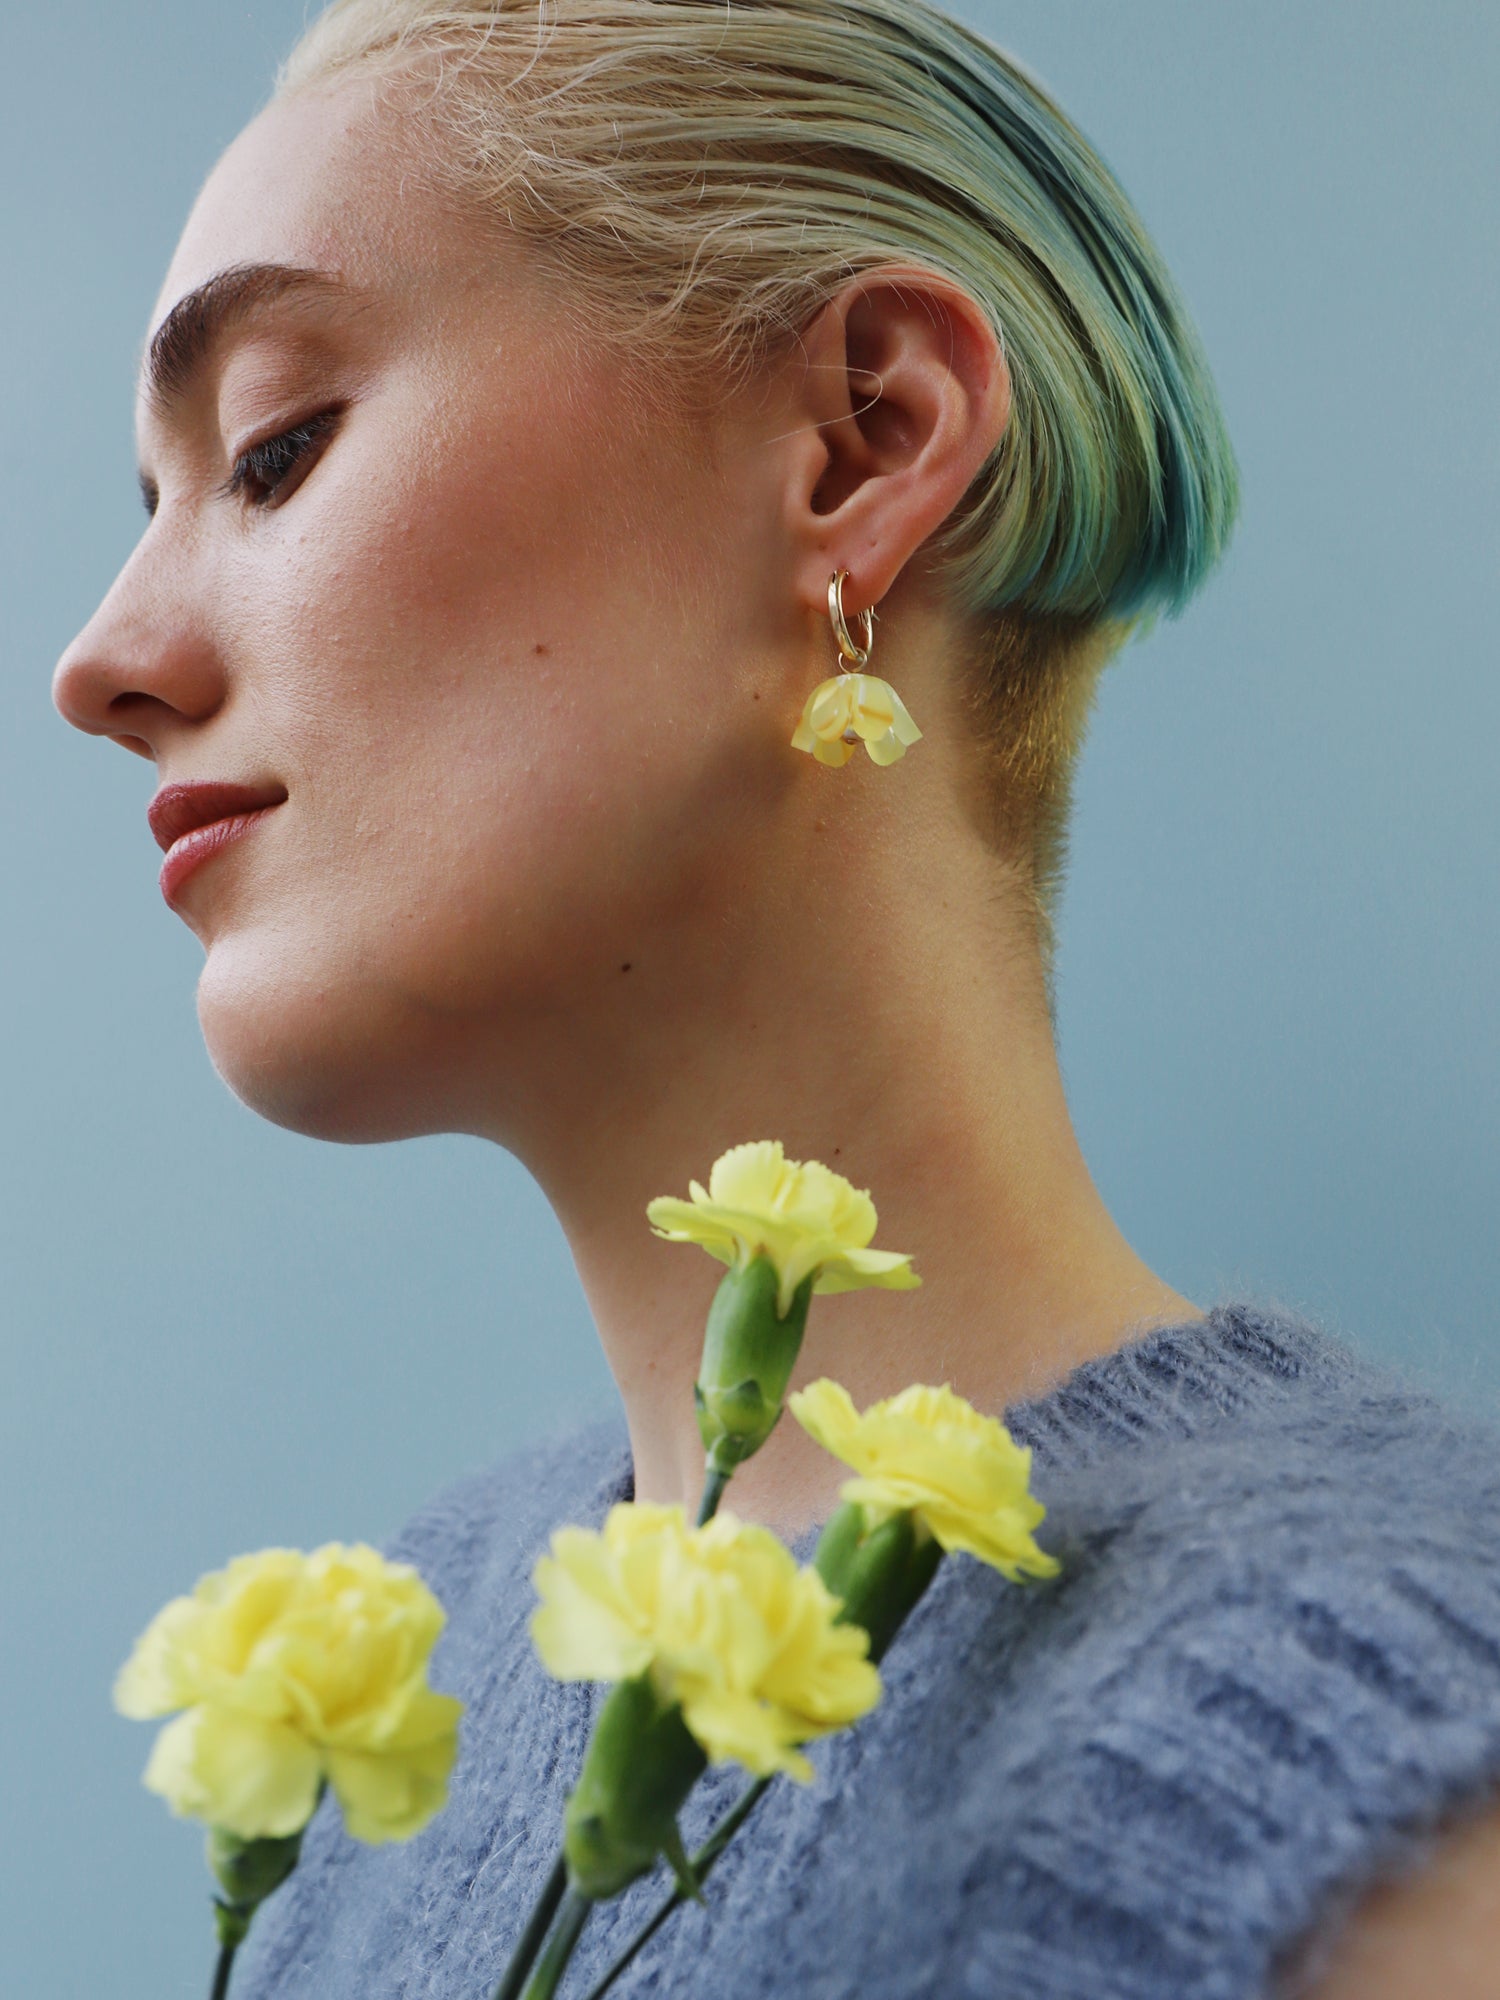 Yellow, sculptural tulip hoop earrings. Made from heat-formed acrylic with high quality glass pearls and 14k gold-filled findings. Handmade in the UK by Wolf & Moon.